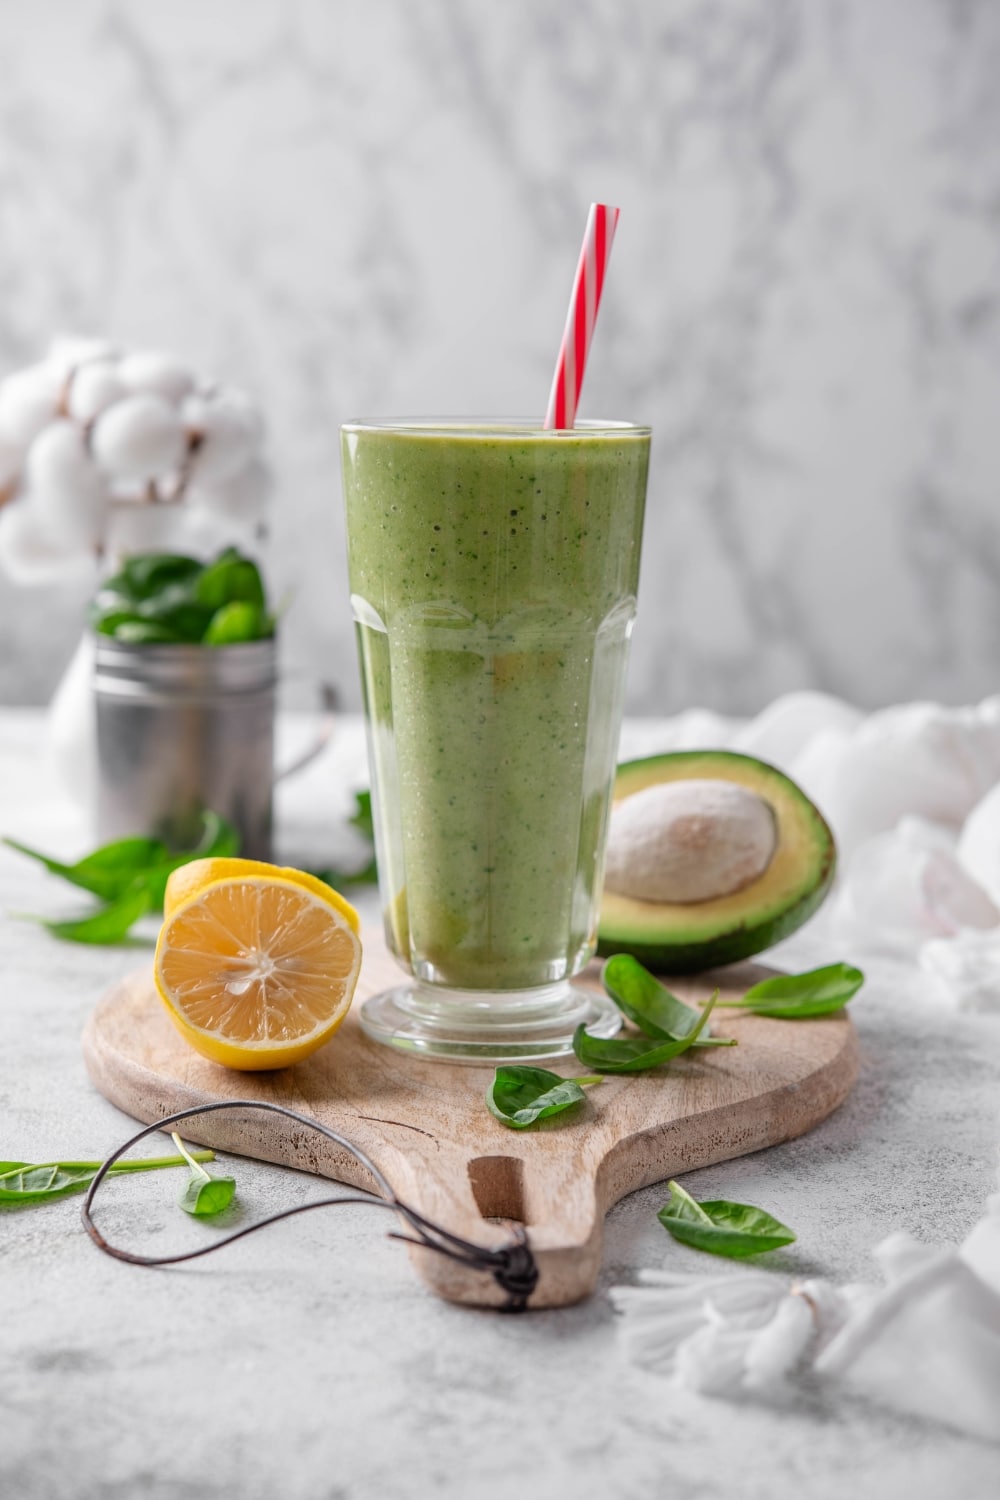 A green smoothie in a glass with a straw on a wooden board surrounded by spinach leaves, a halved lemon, and a halved avocado.